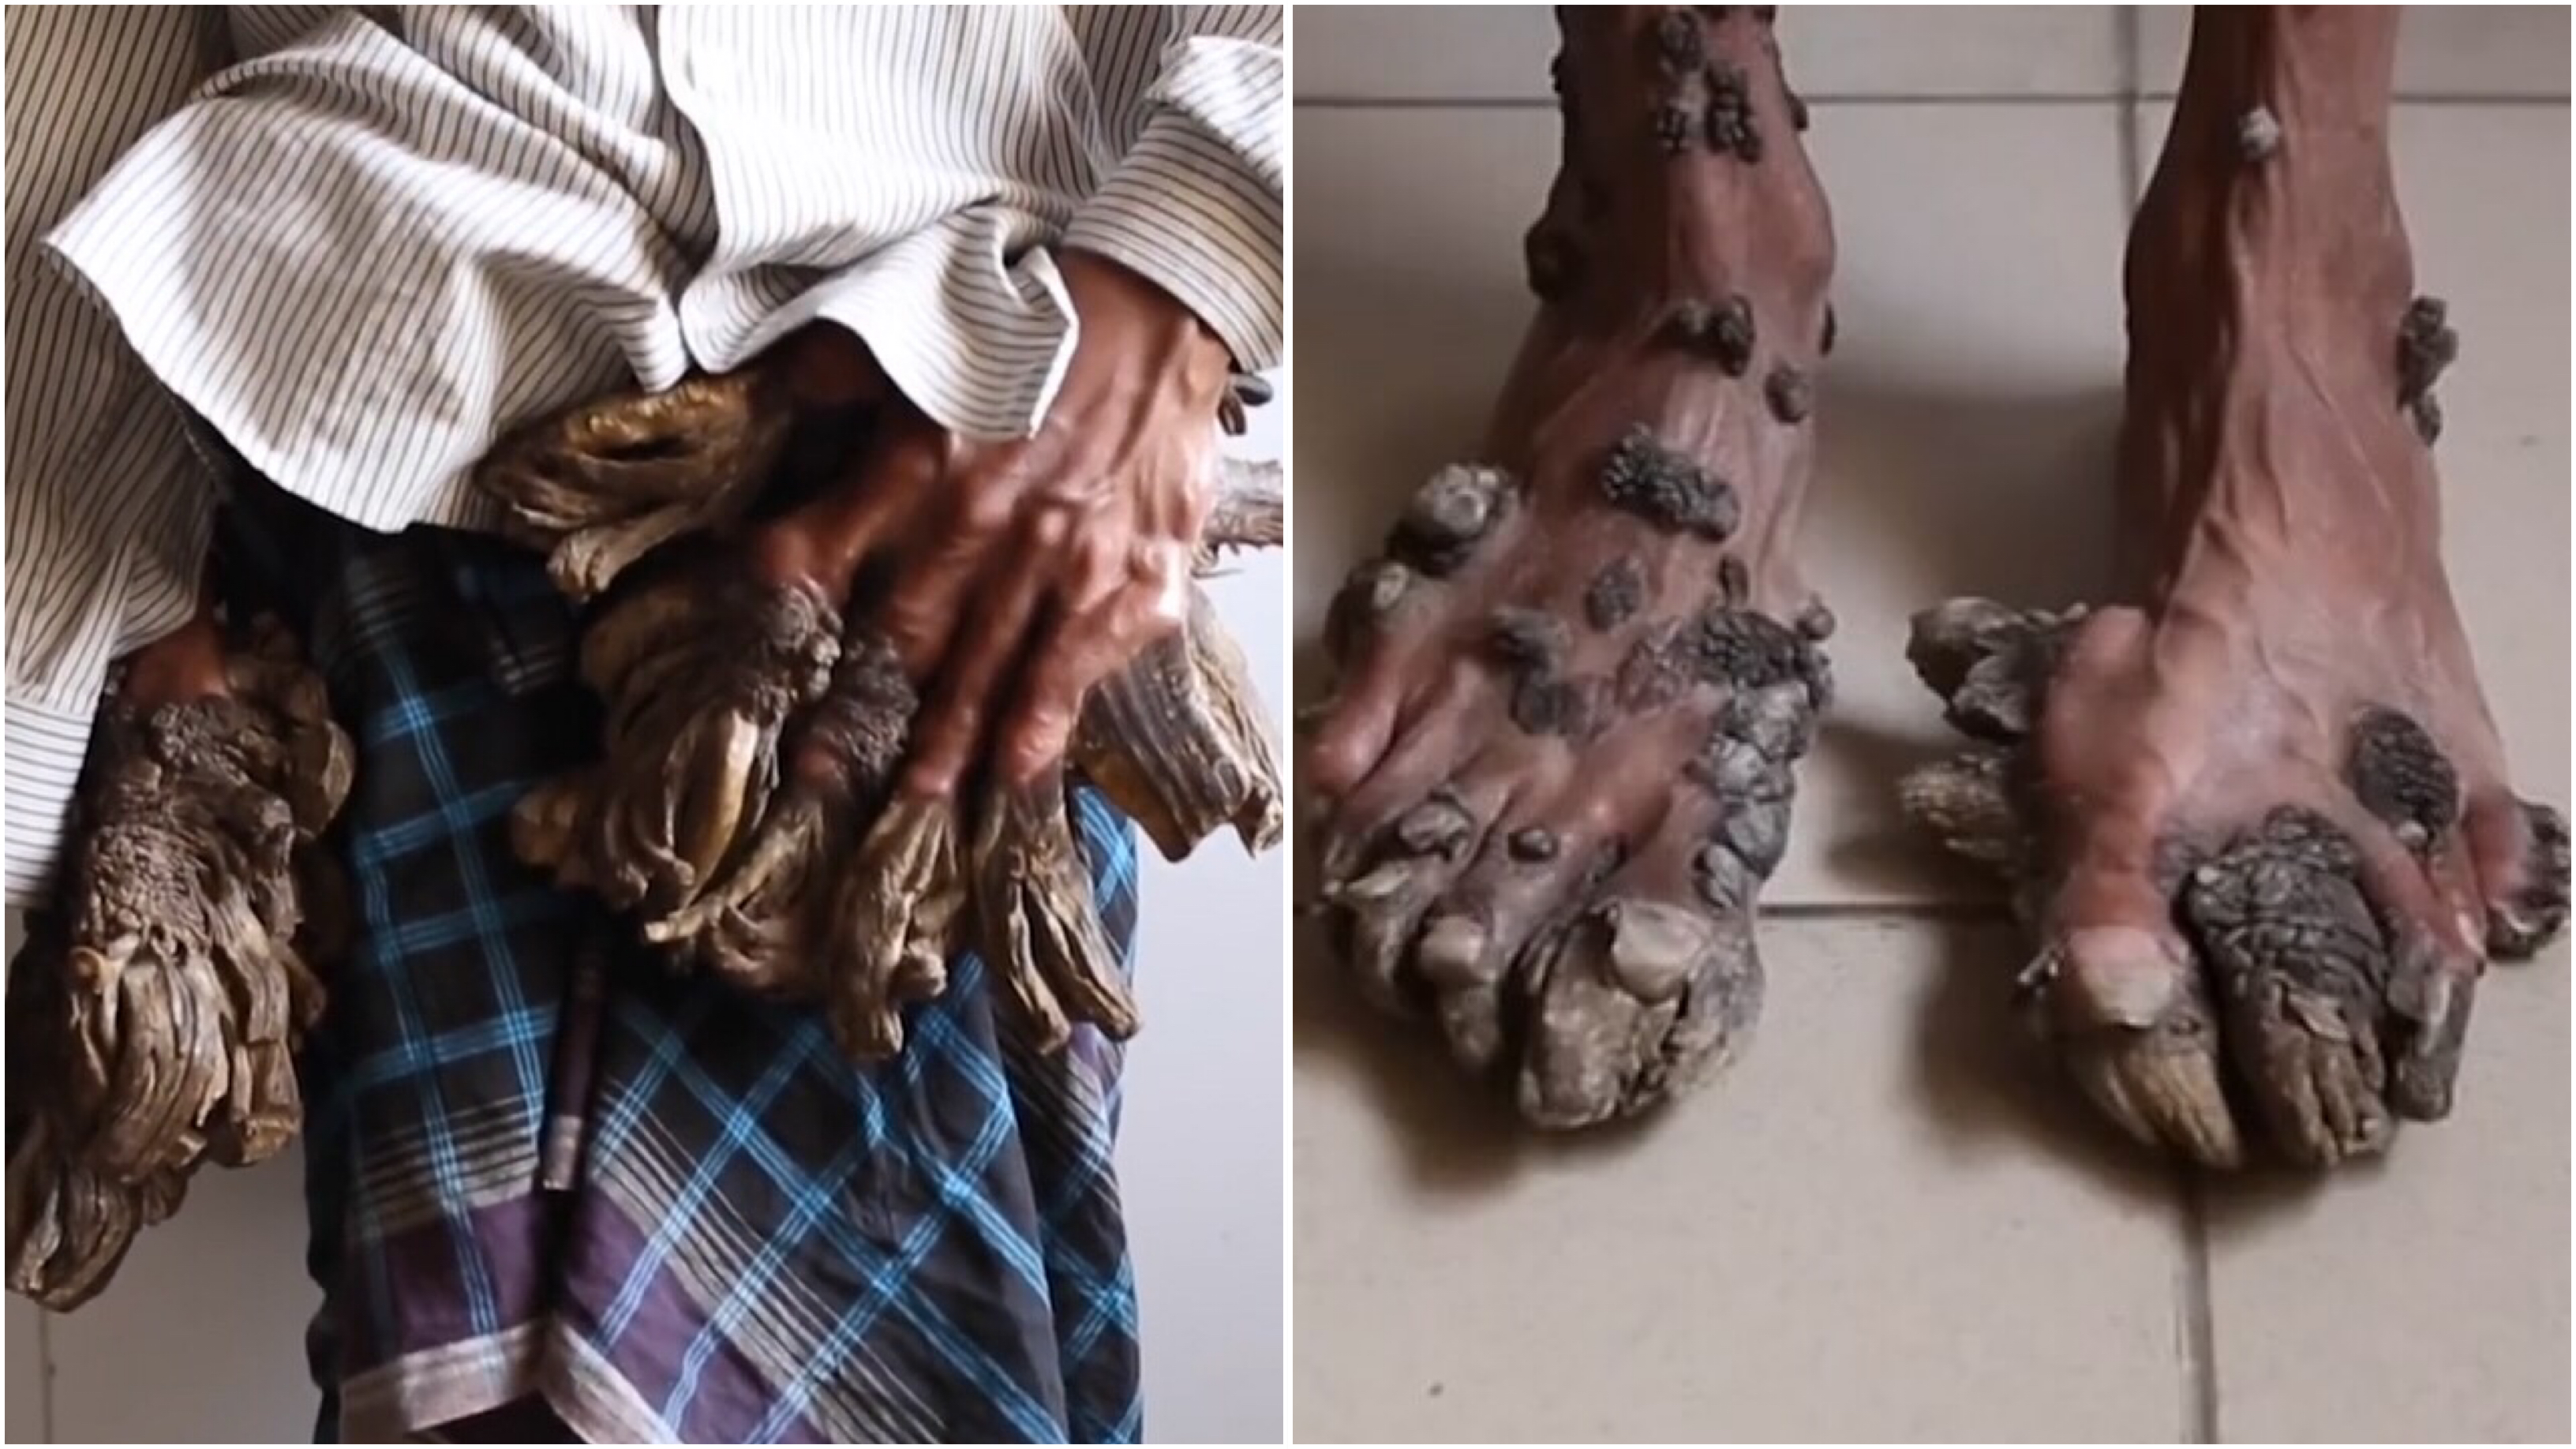 Asia news: Bangladeshi tree man requires more surgeries on growths3264 x 1836